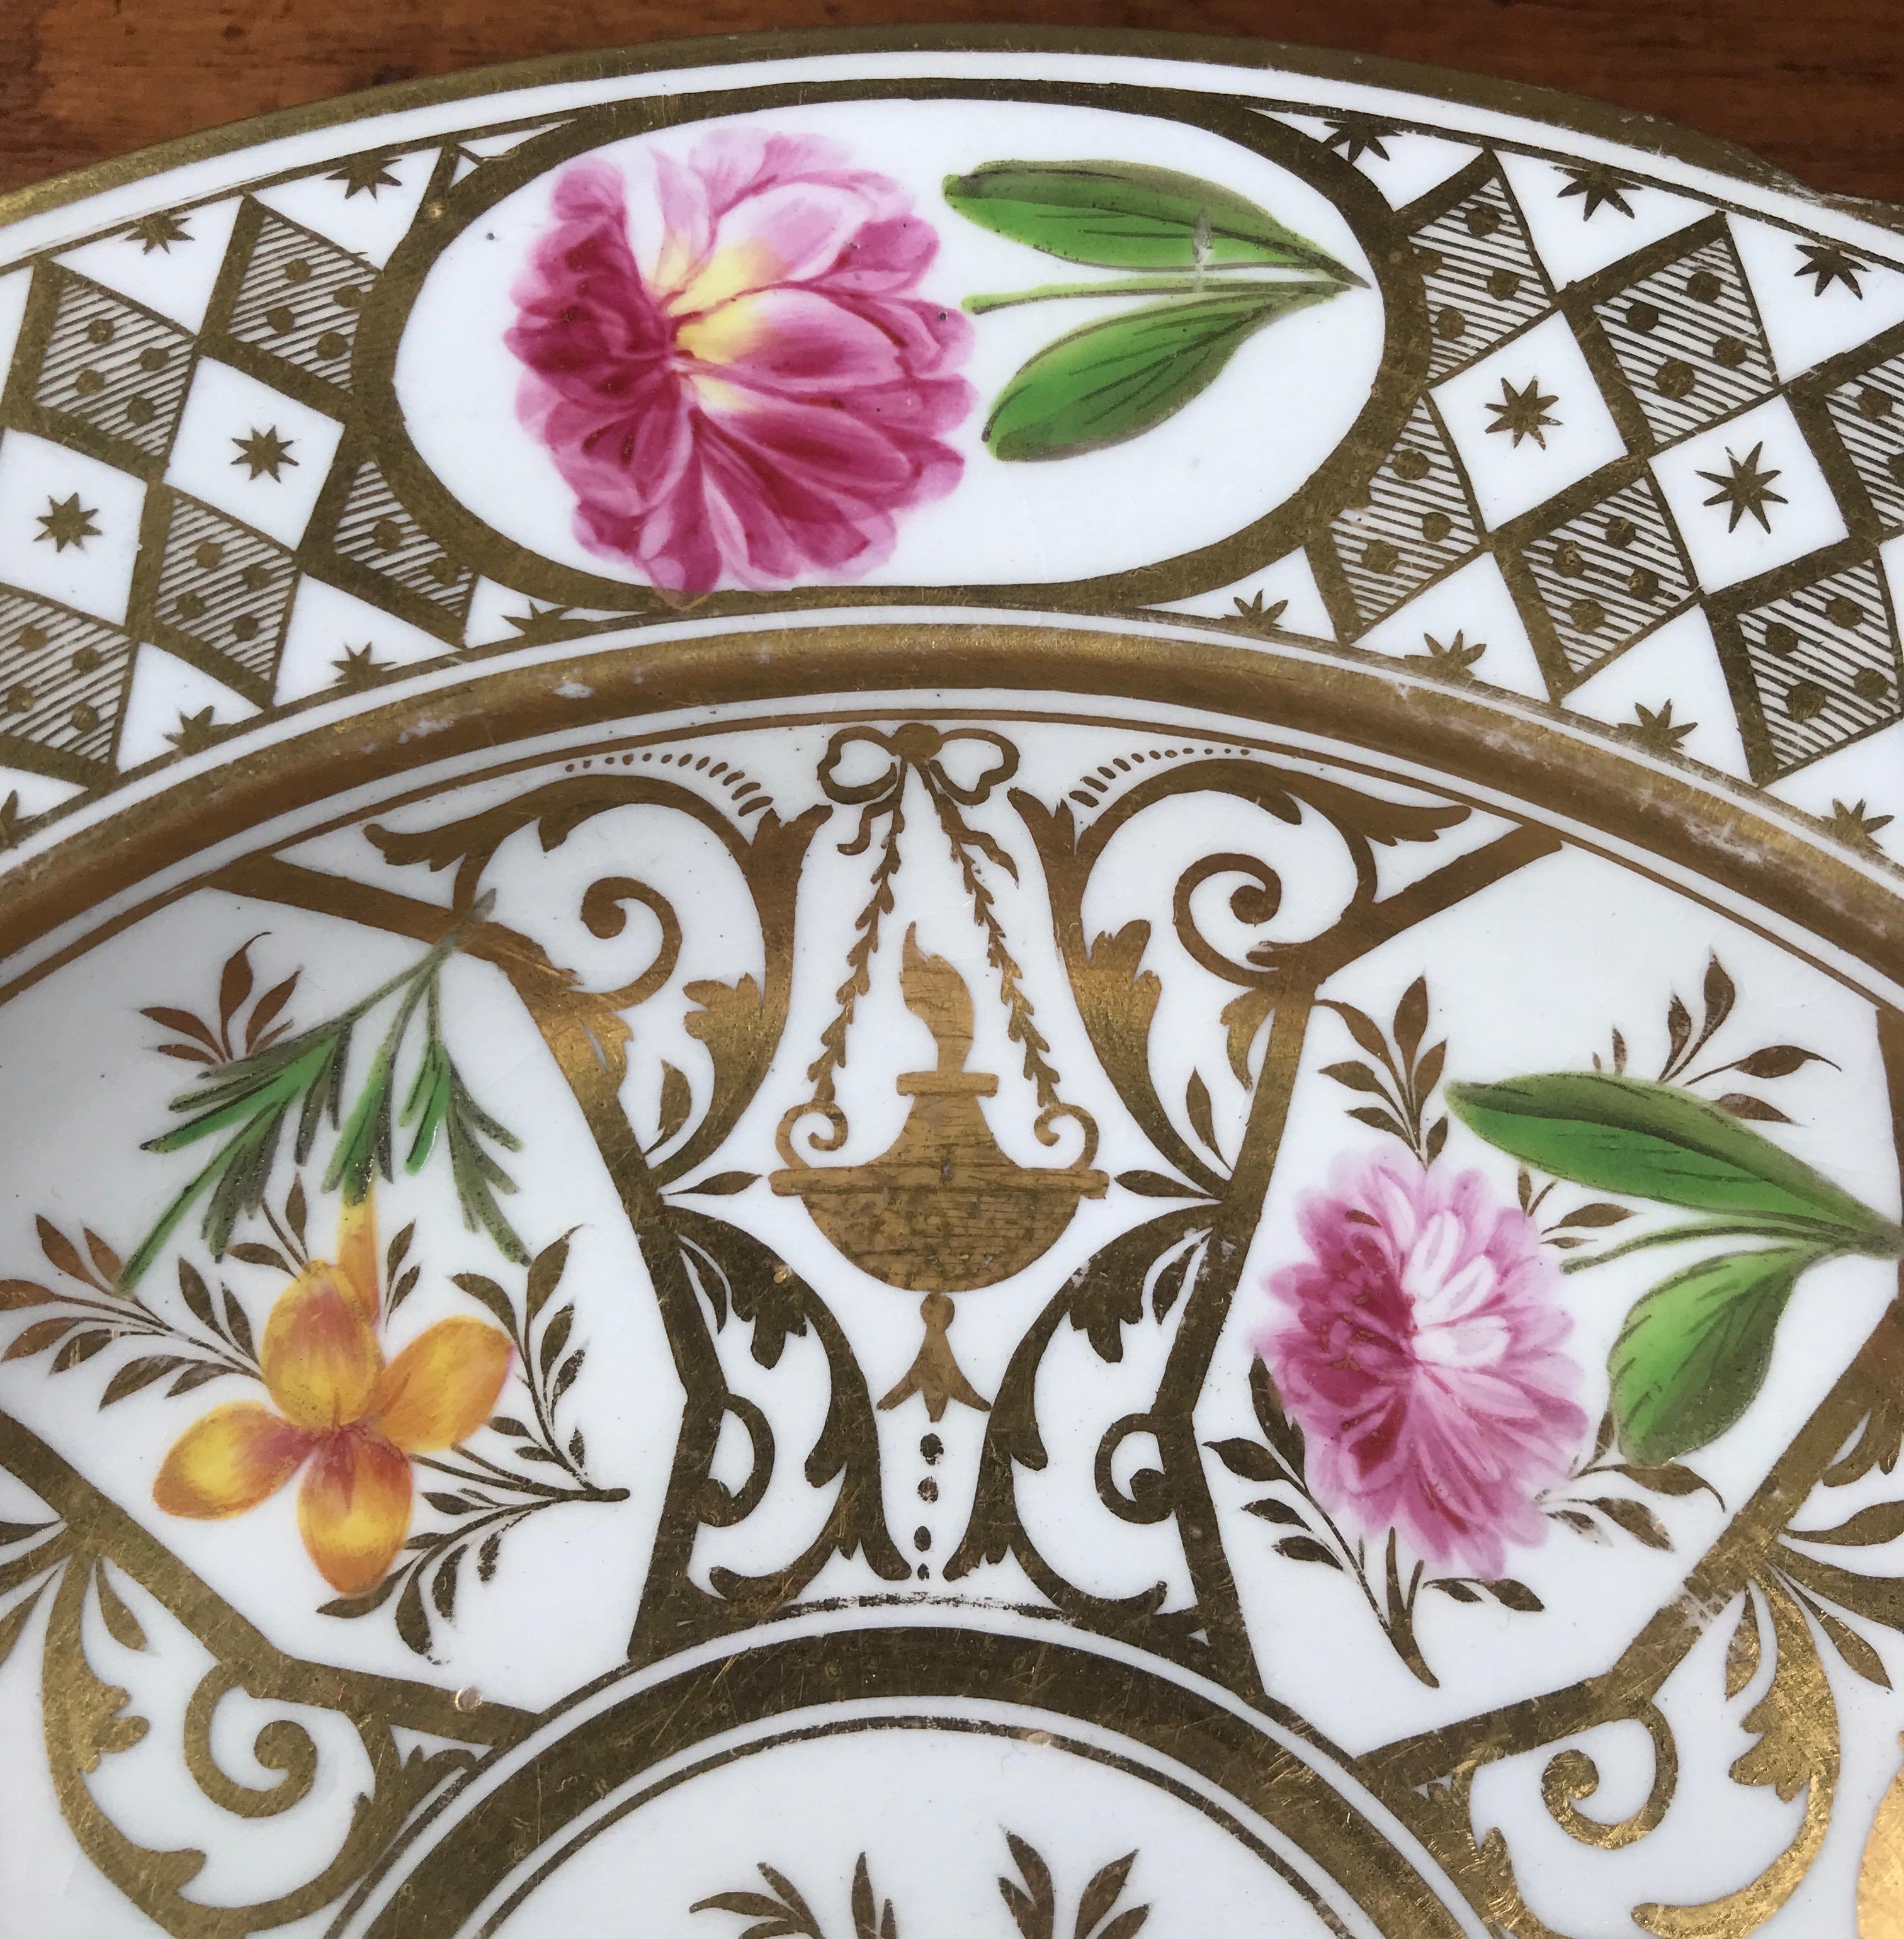 Early 19th Century Coalport Plate, Baxter Decorated with Flowers & Geometric Gilding, c. 1805